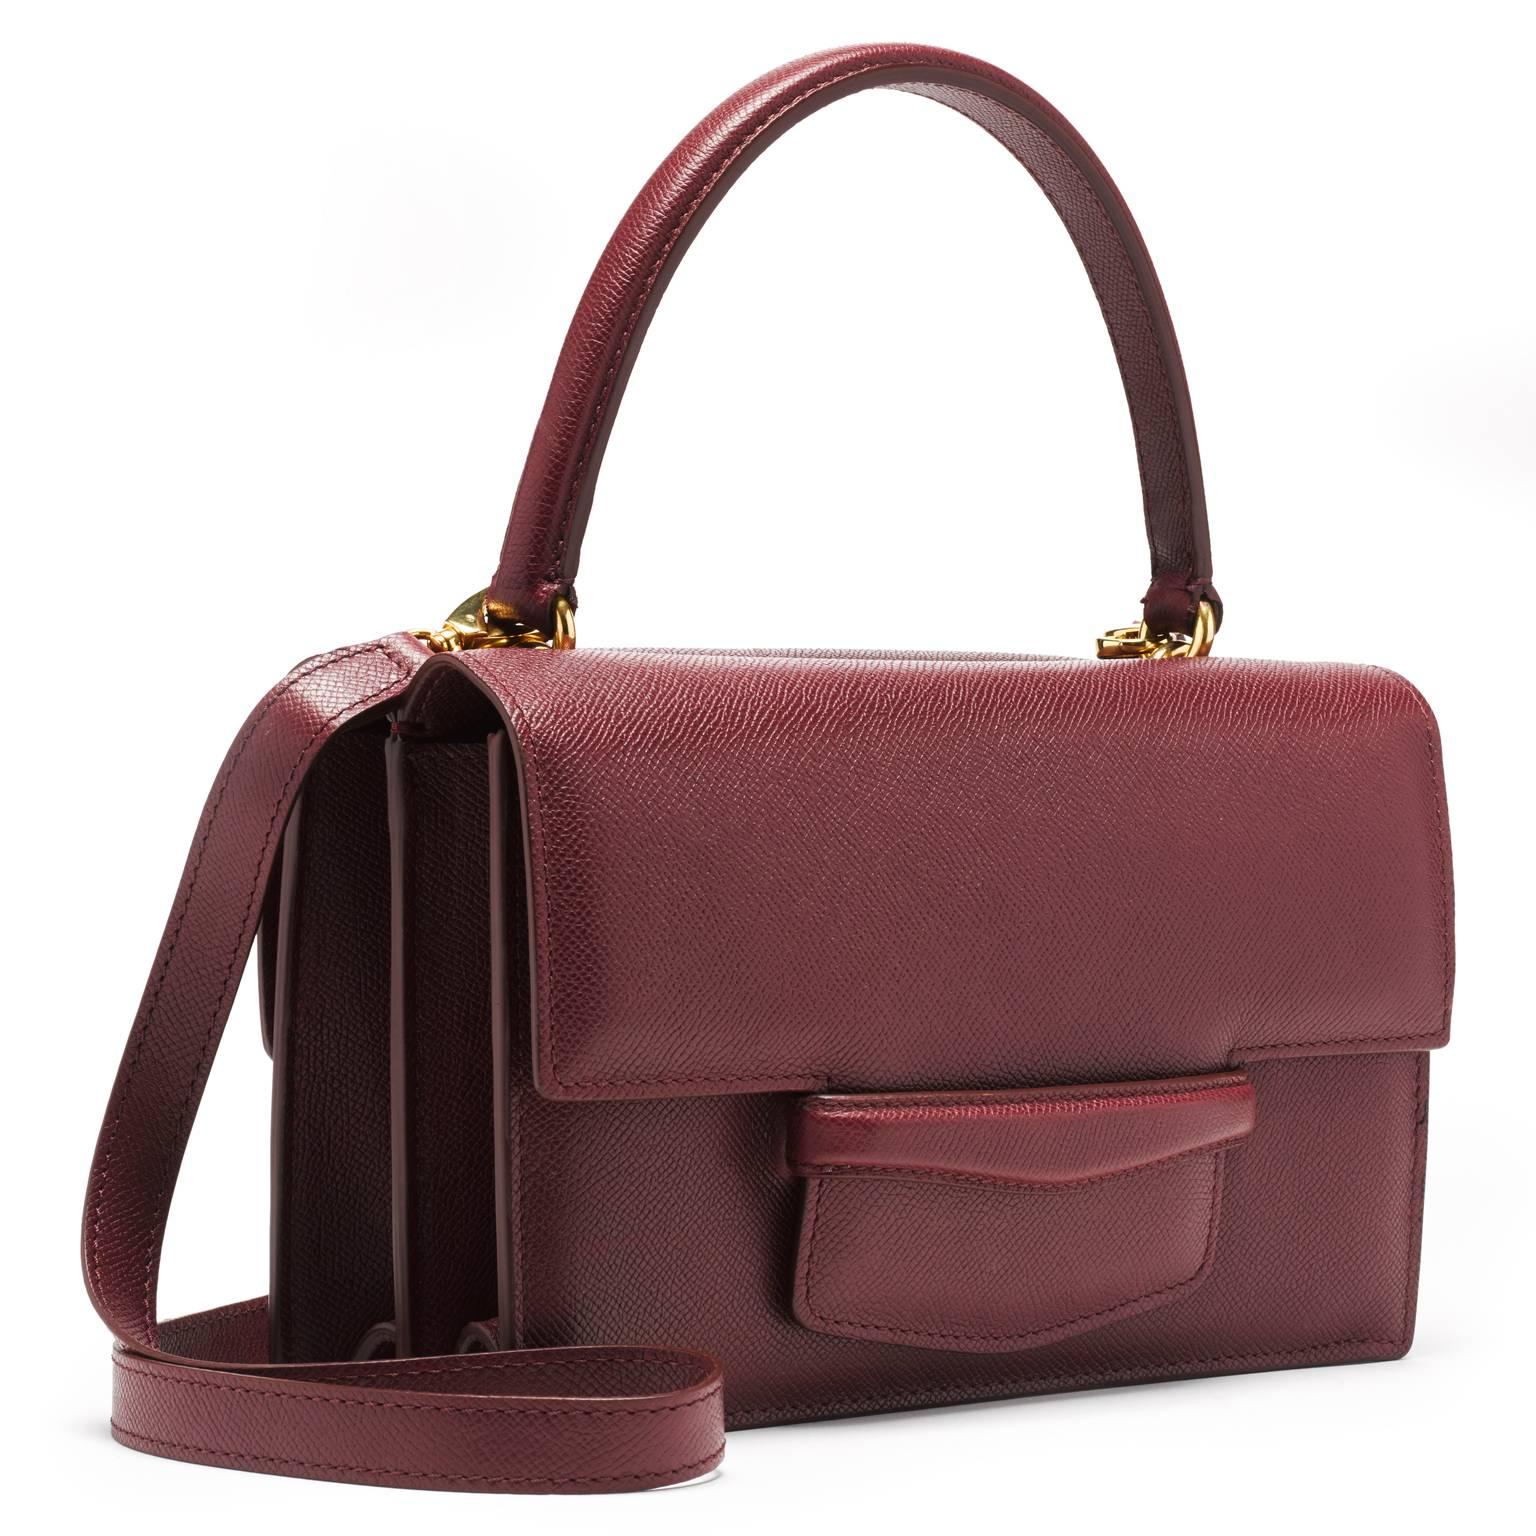 This double gusseted bag is made of pebbled leather in a matte finish. The interior is lined in brown suede. A stitched double-sided handle is joined to the bag with two interlocking gold rings. There is an additional 40” detachable shoulder strap.